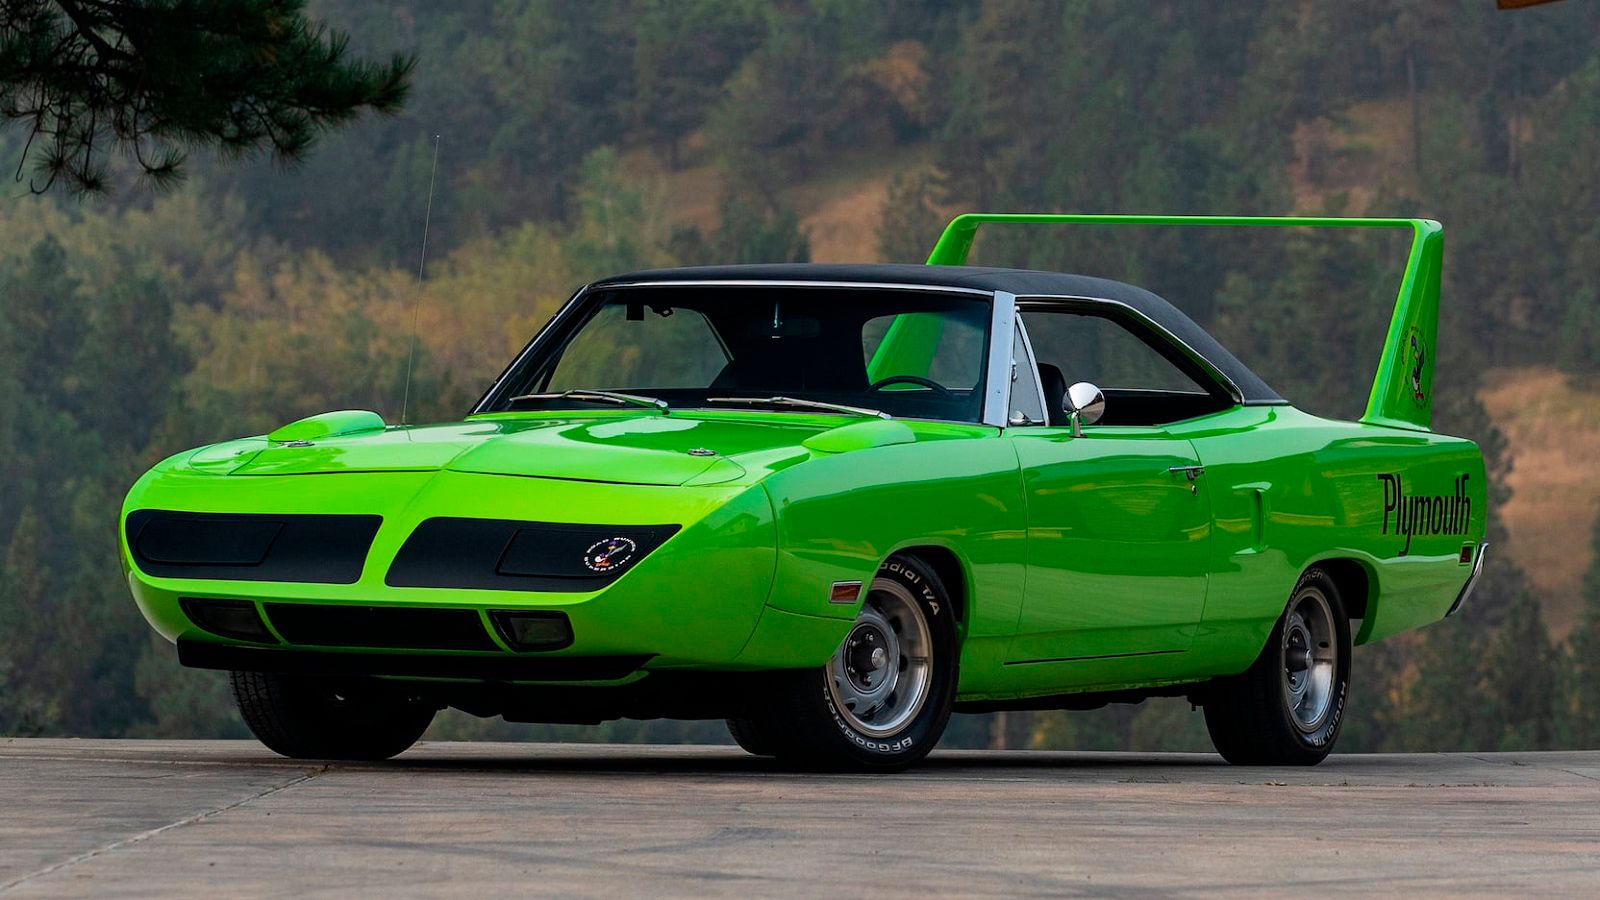 A parked 1970 Plymouth Superbird 